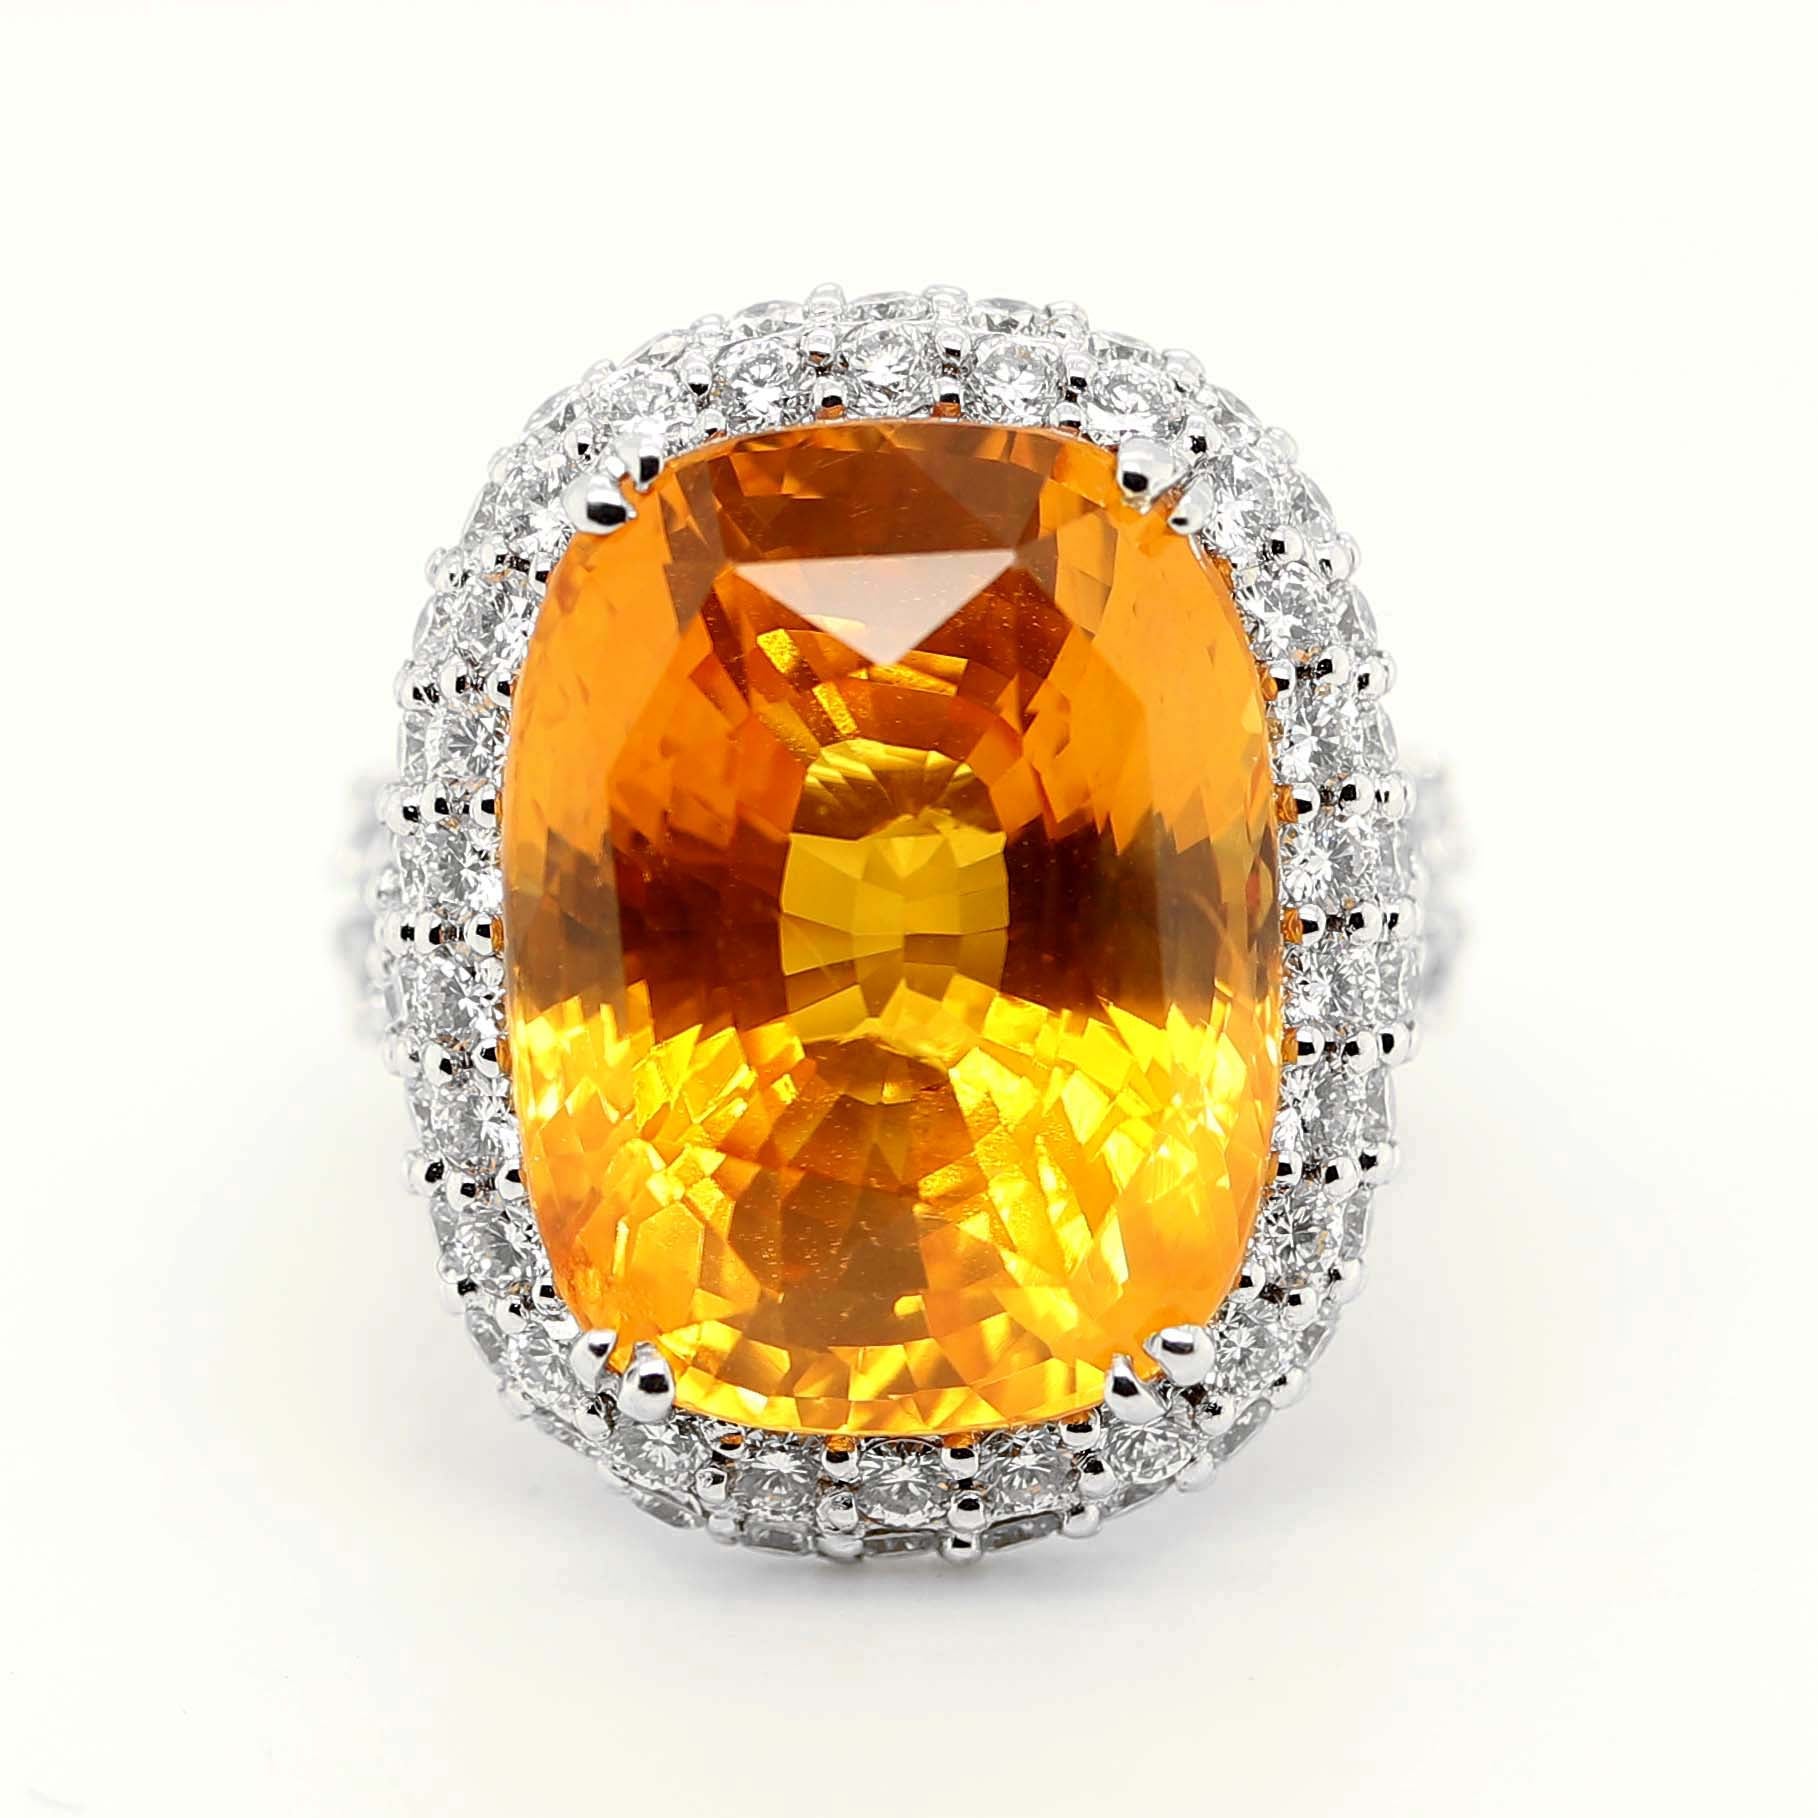 GIA Certified 24.29 Carat Yellow Sapphire Ring in 18k White Gold For Sale